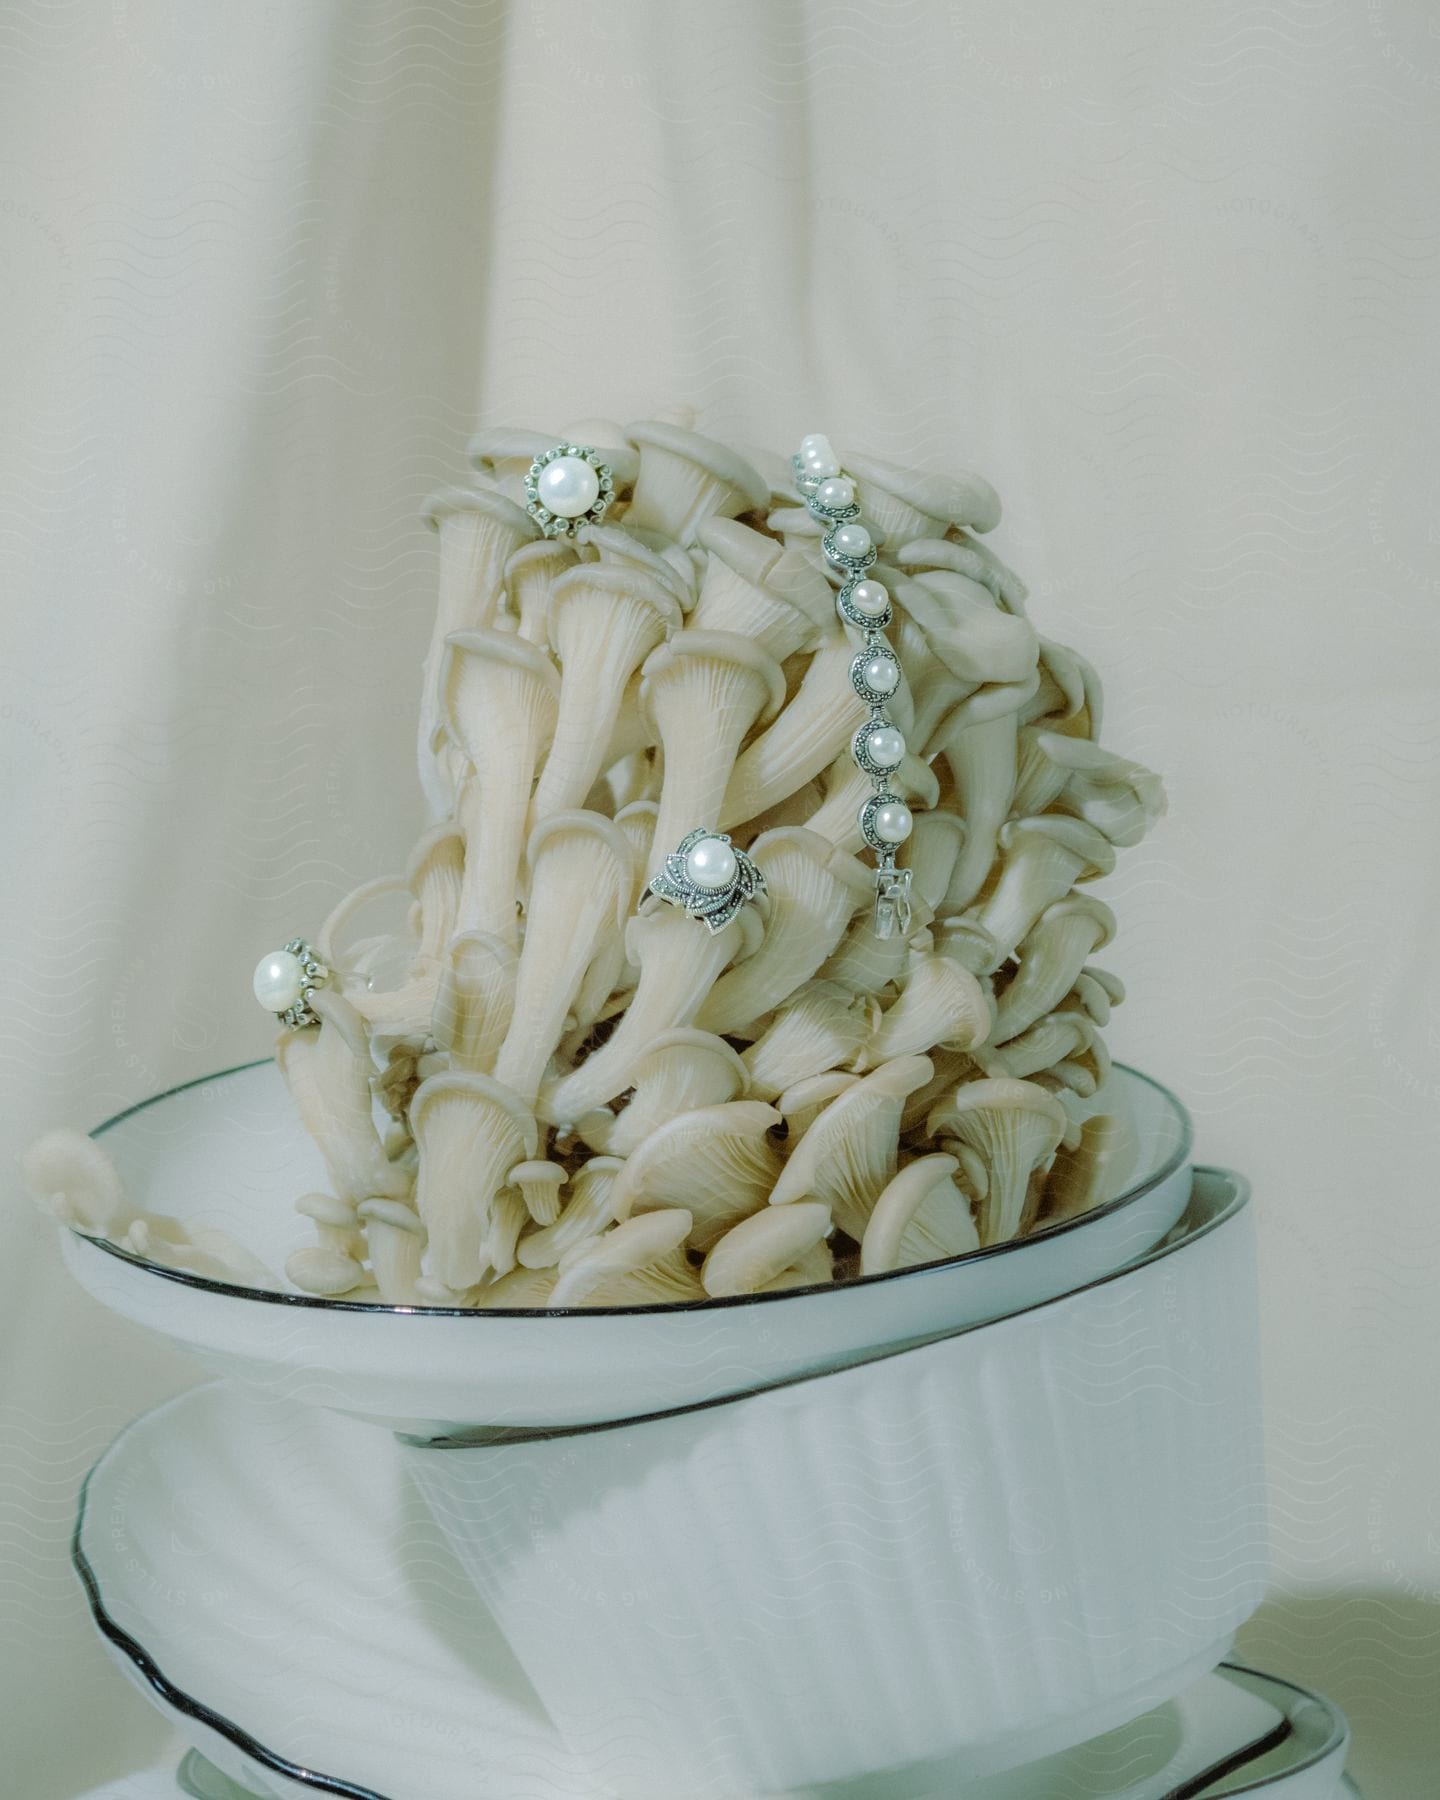 A cluster of oyster mushrooms adorned with pearl jewelry in a white bowl